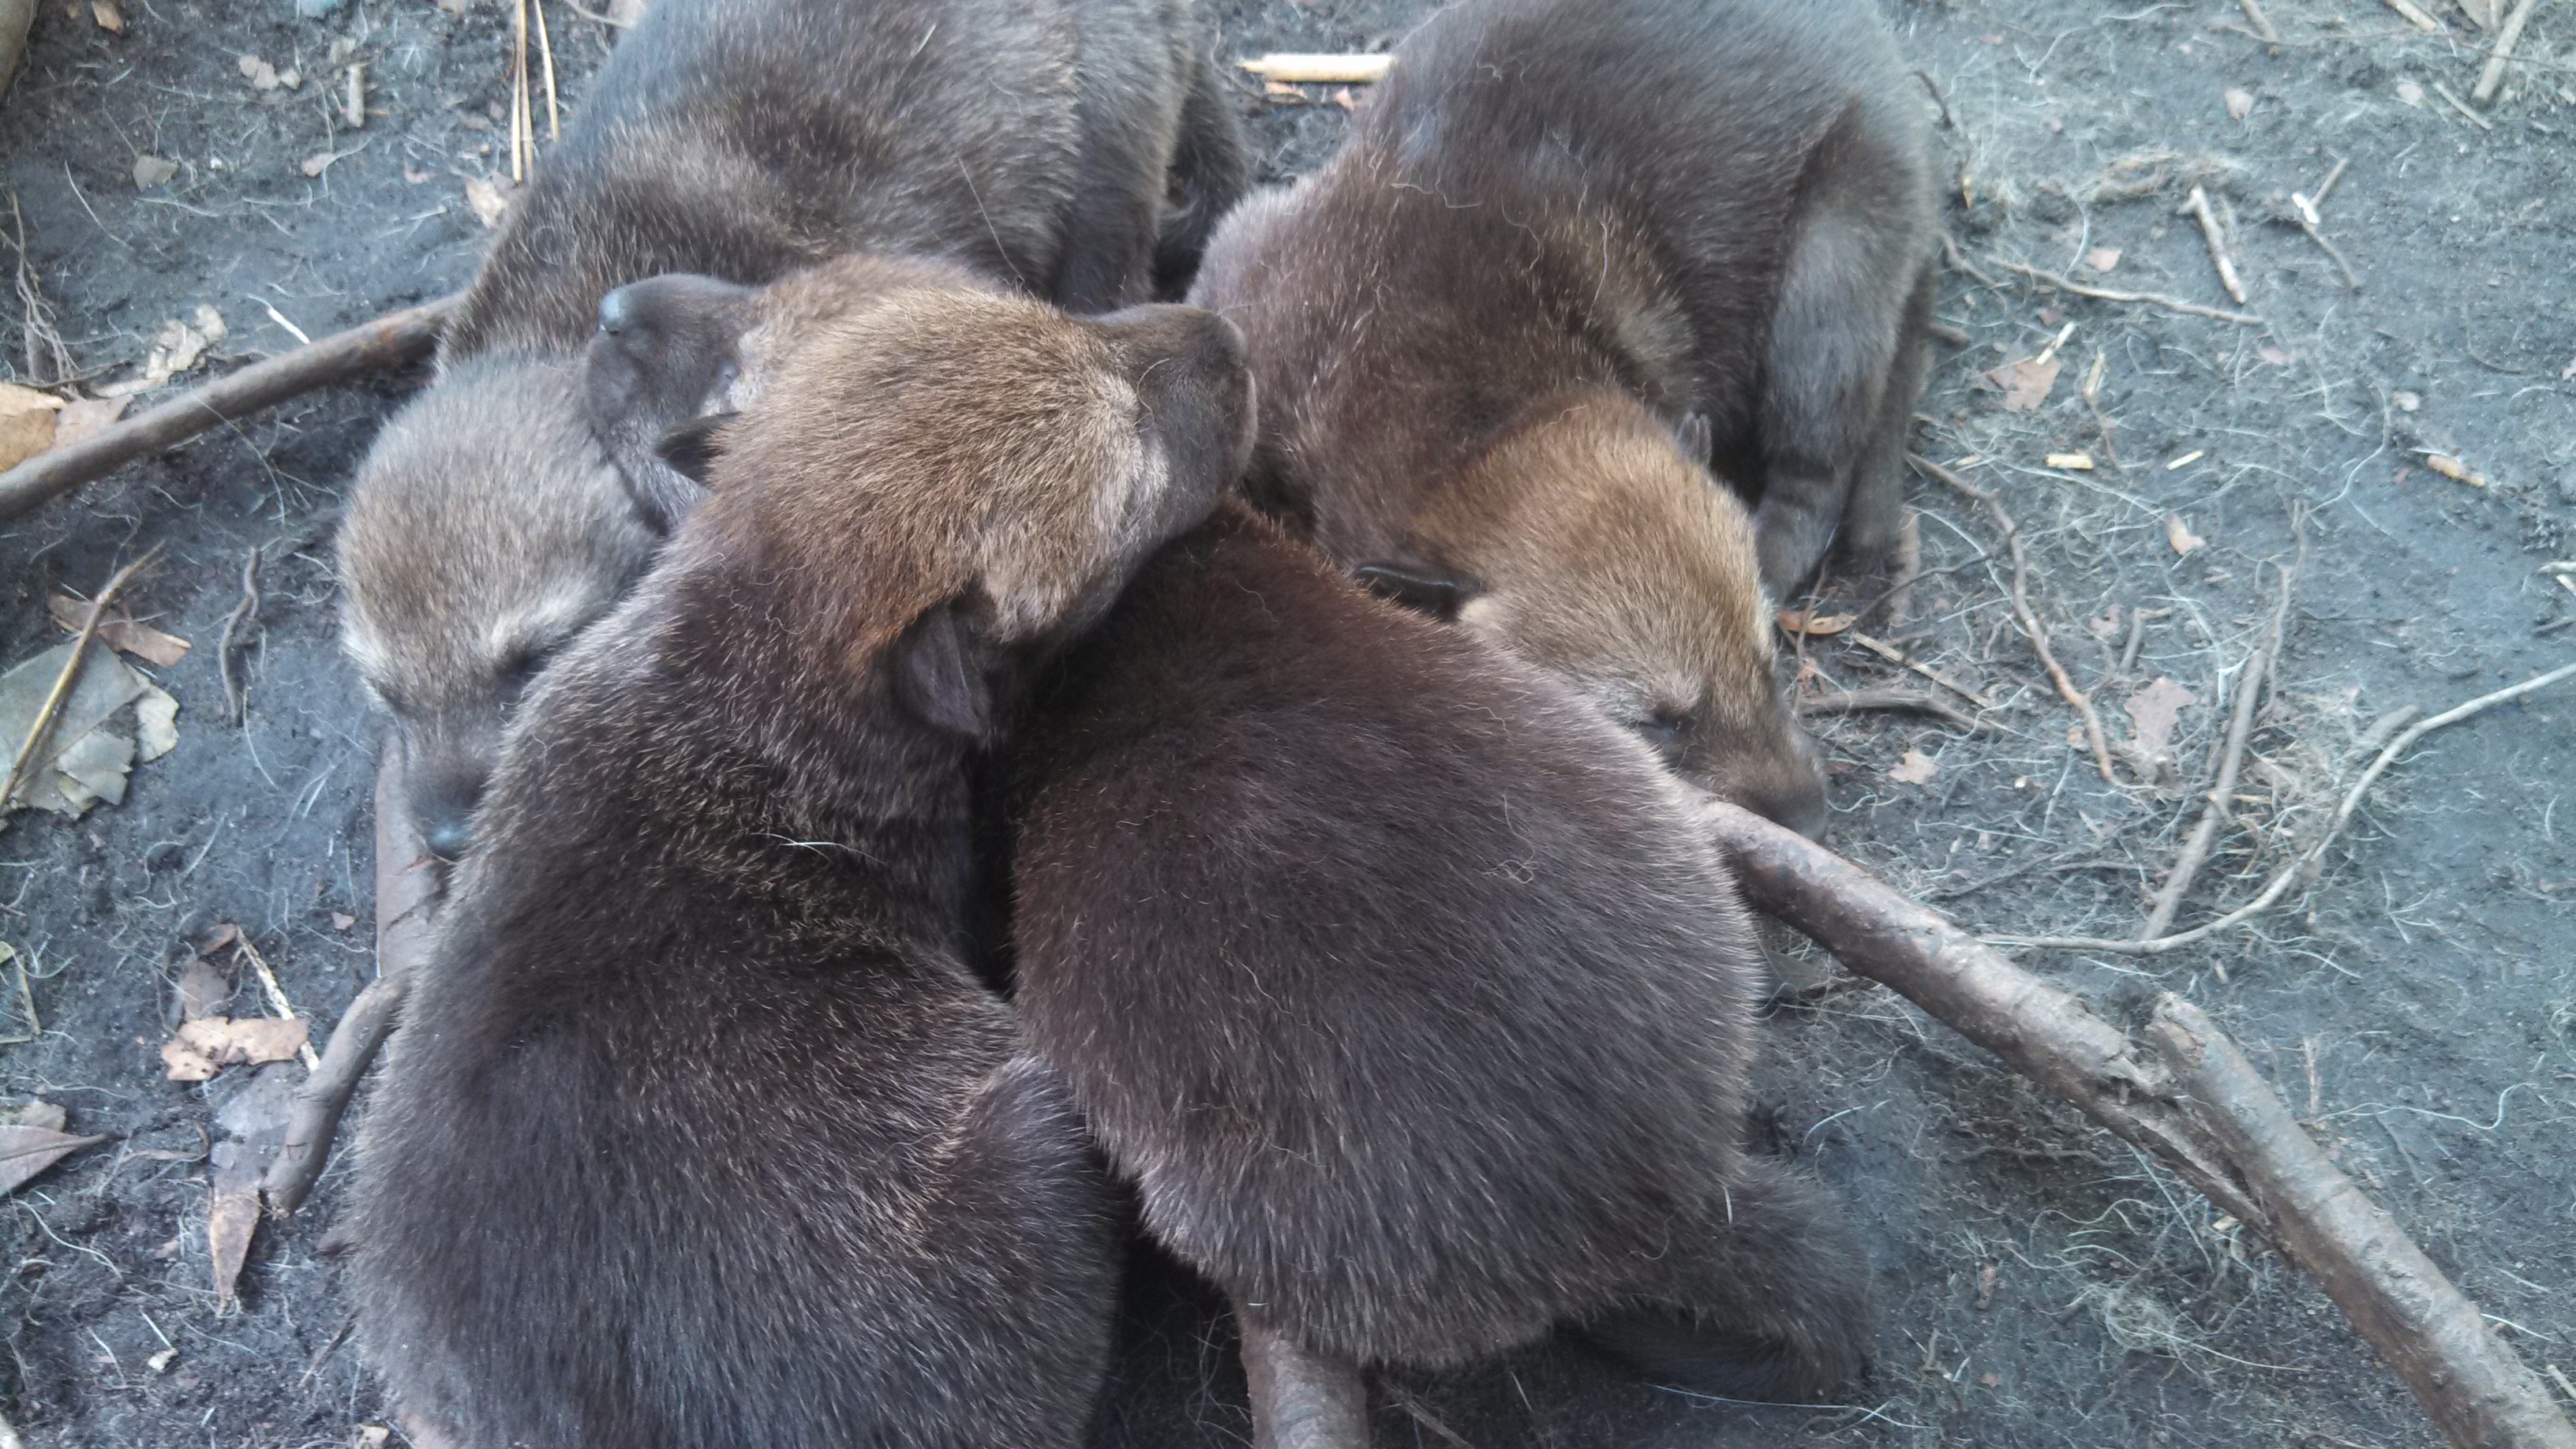 Red wolf Lilly's four newborn pups huddled together. Pups were born in 2014 at Sewee Center